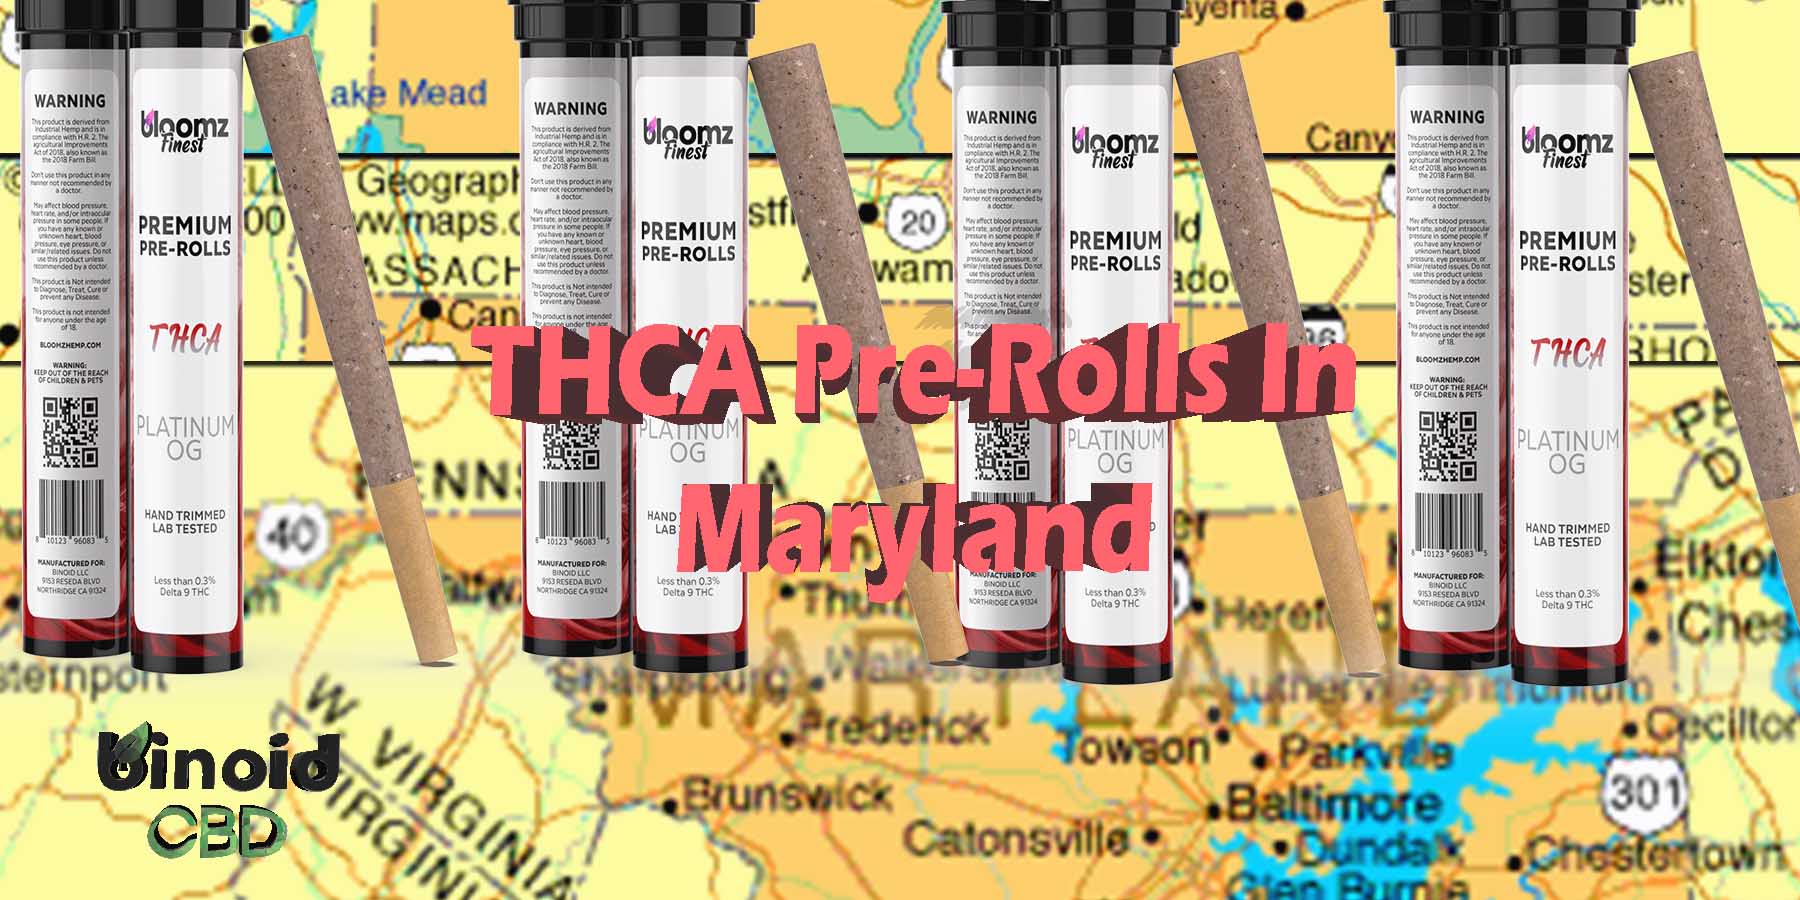 THCA Pre-Rolls In Maryland THCA Platinum OG Hemp Flower Indica Where To Get Near Me Best Place Lowest Price Coupon Discount Strongest Brand